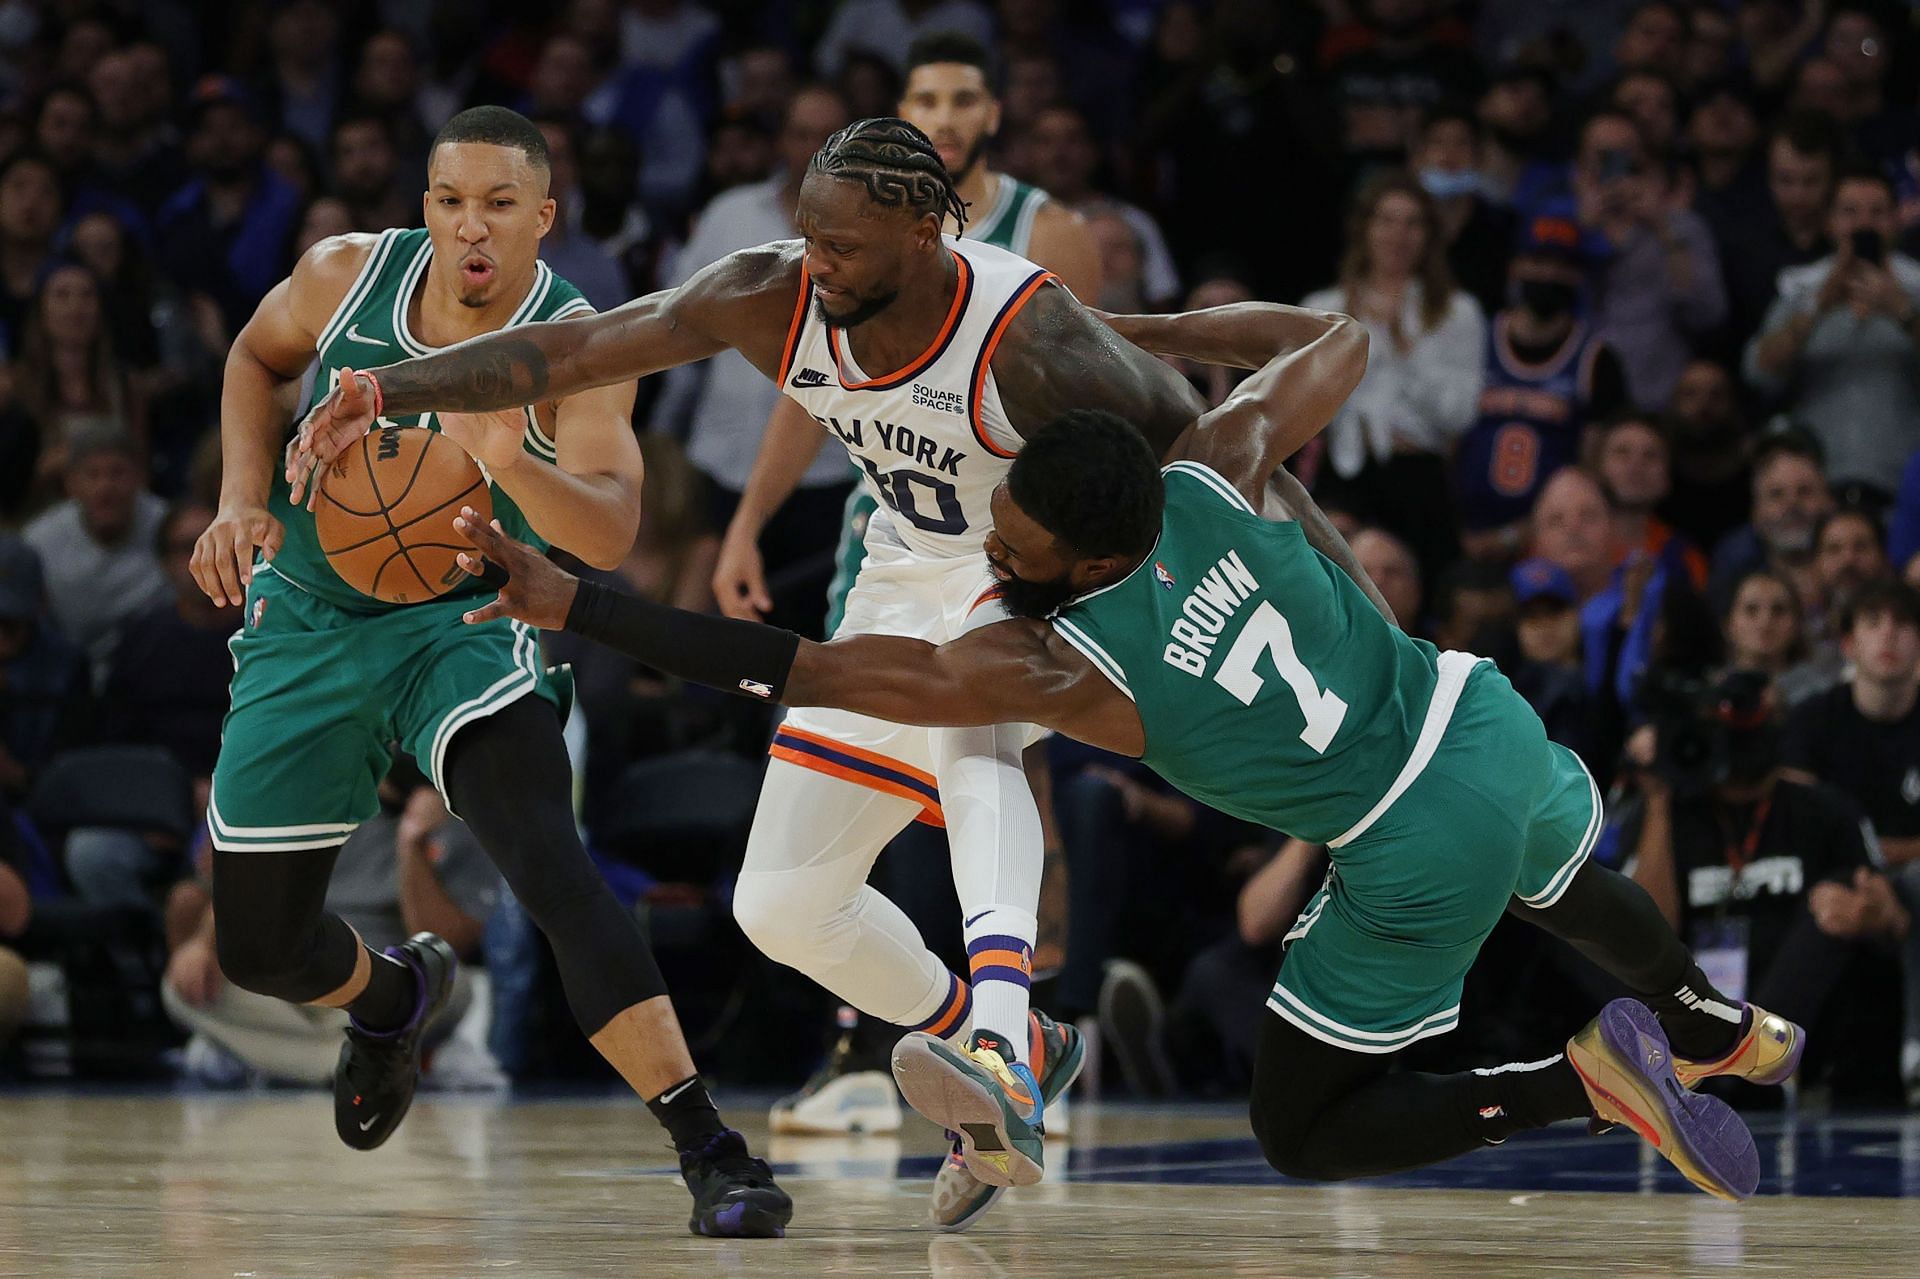 The Boston Celtics had no answer for Julius Randle in their game against the New York Knicks.